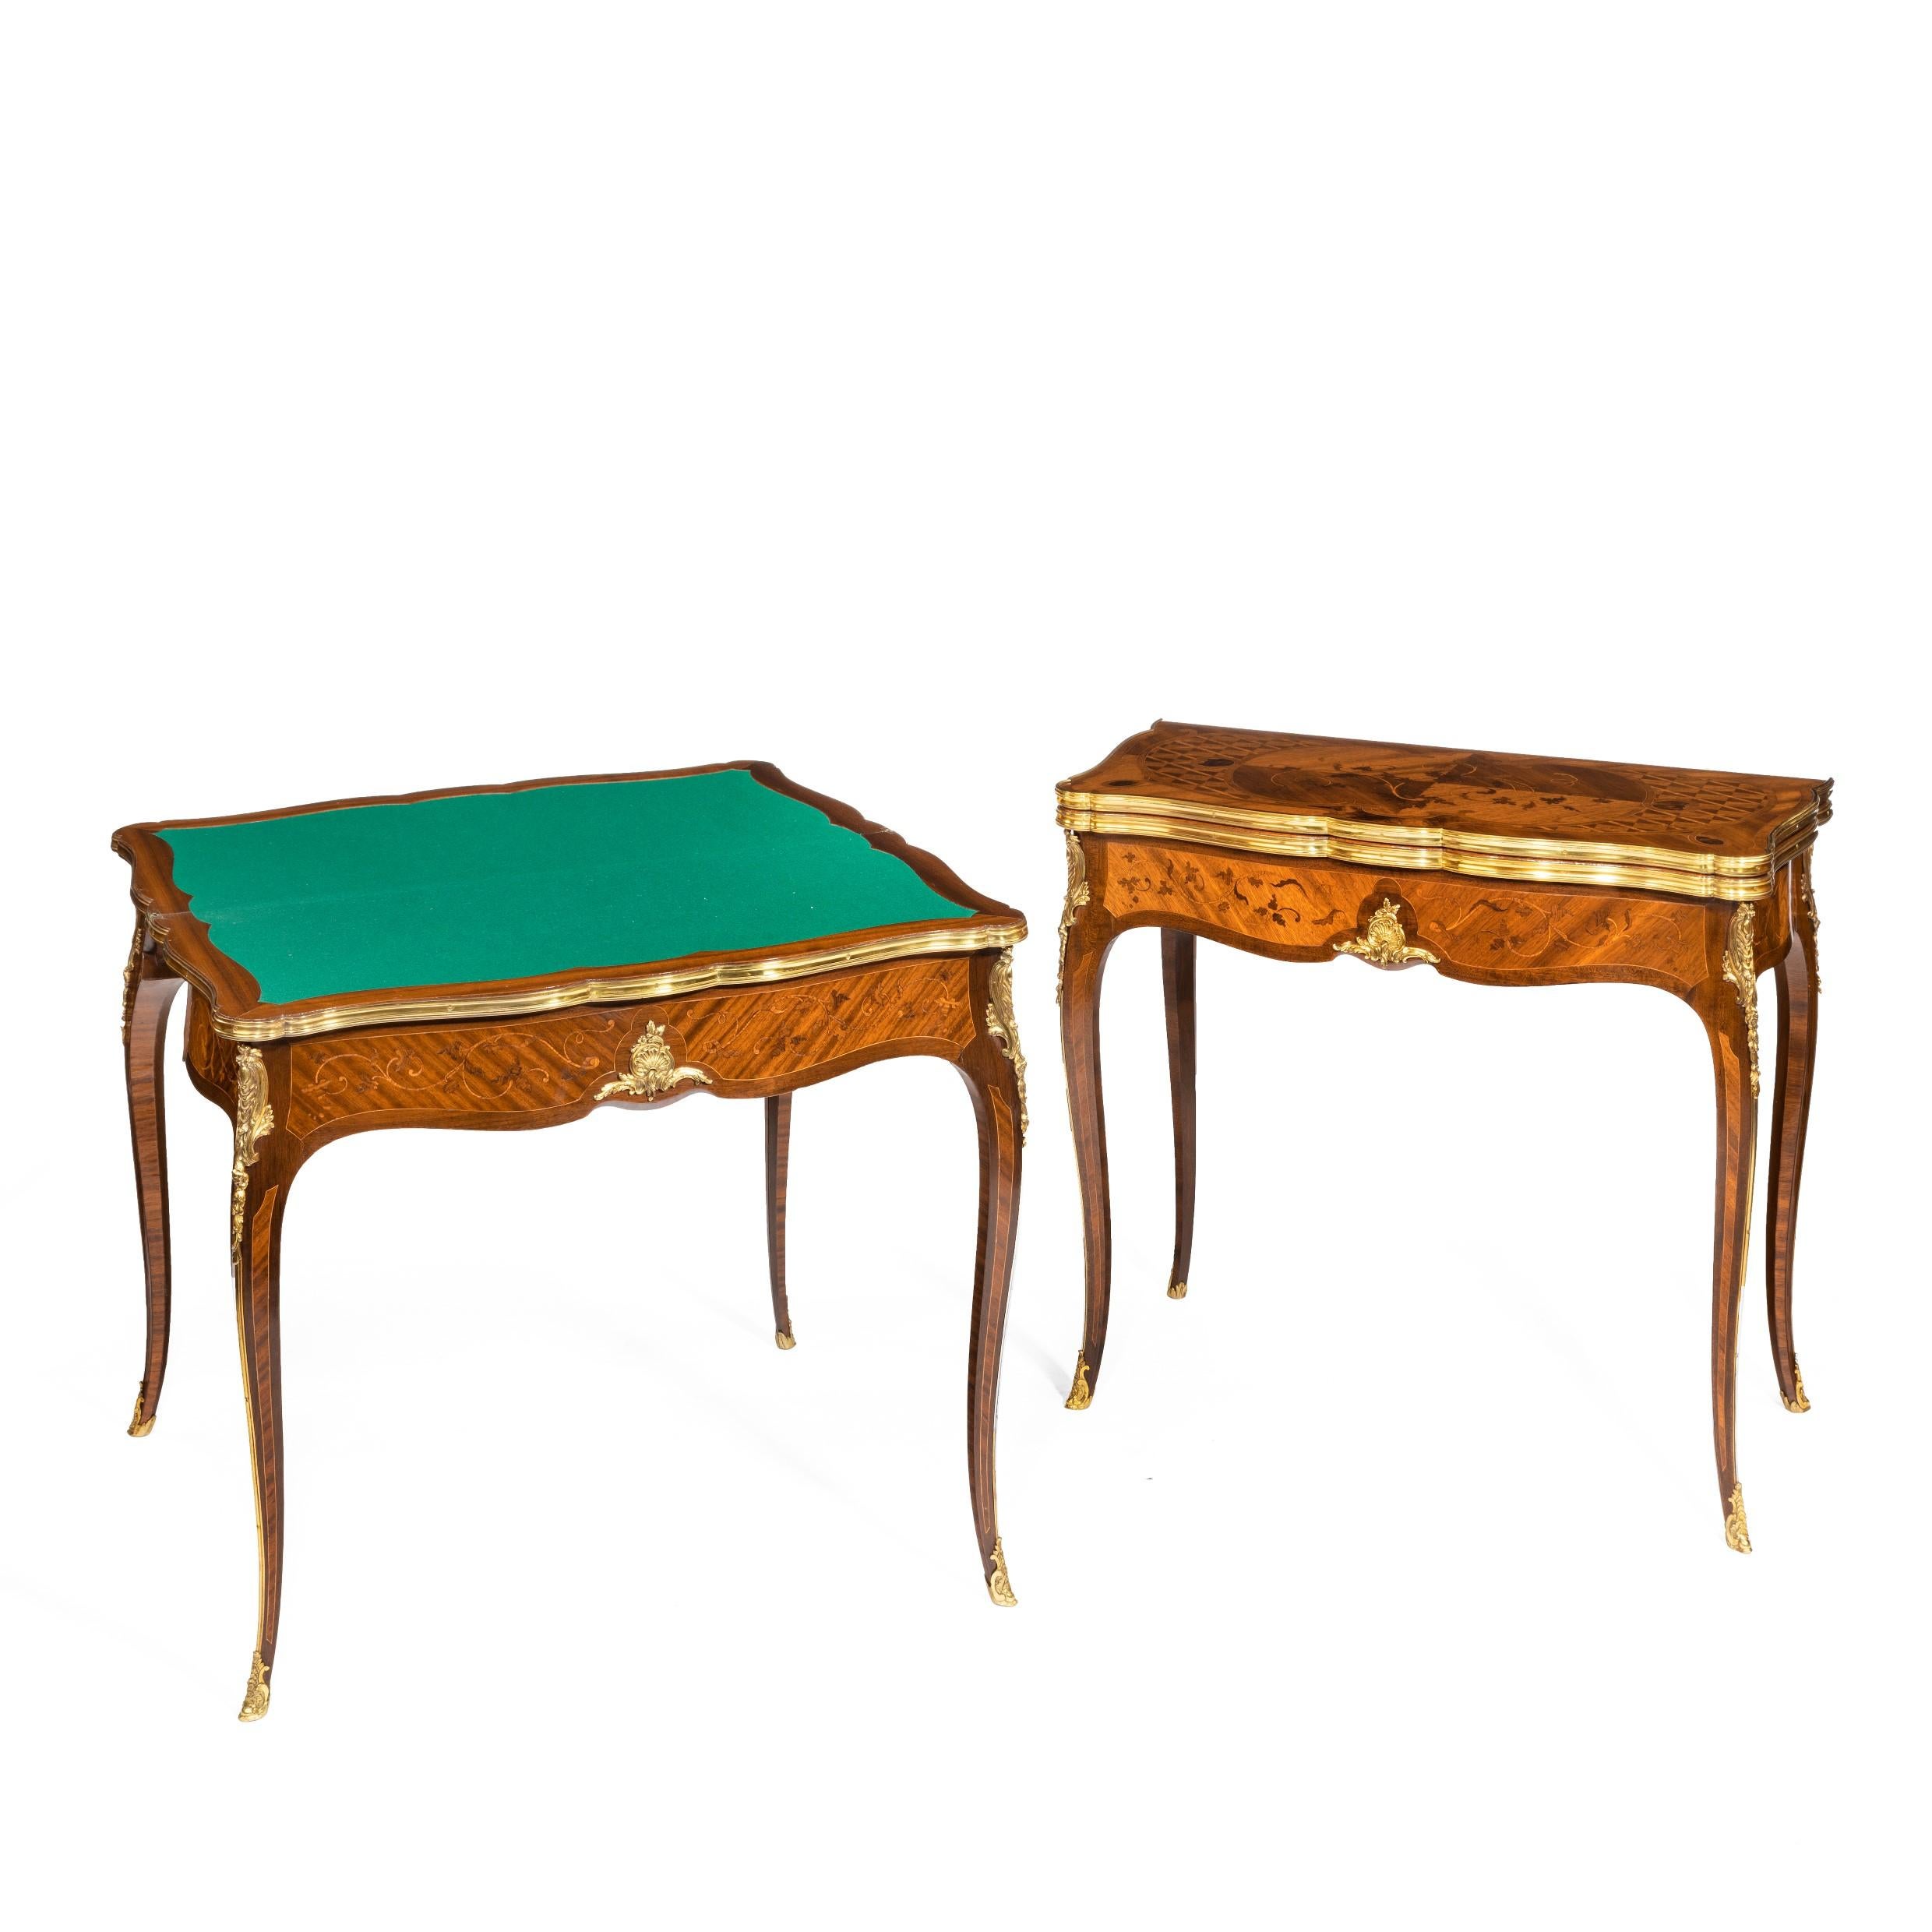 A pair of kingwood card tables by G. Durand, each with a shaped folding top above a serpentine frieze and elegant cabriole legs with gilt bronze foliate mounts, edges and sabots, decorated overall with superb marquetry panels of cross-grained